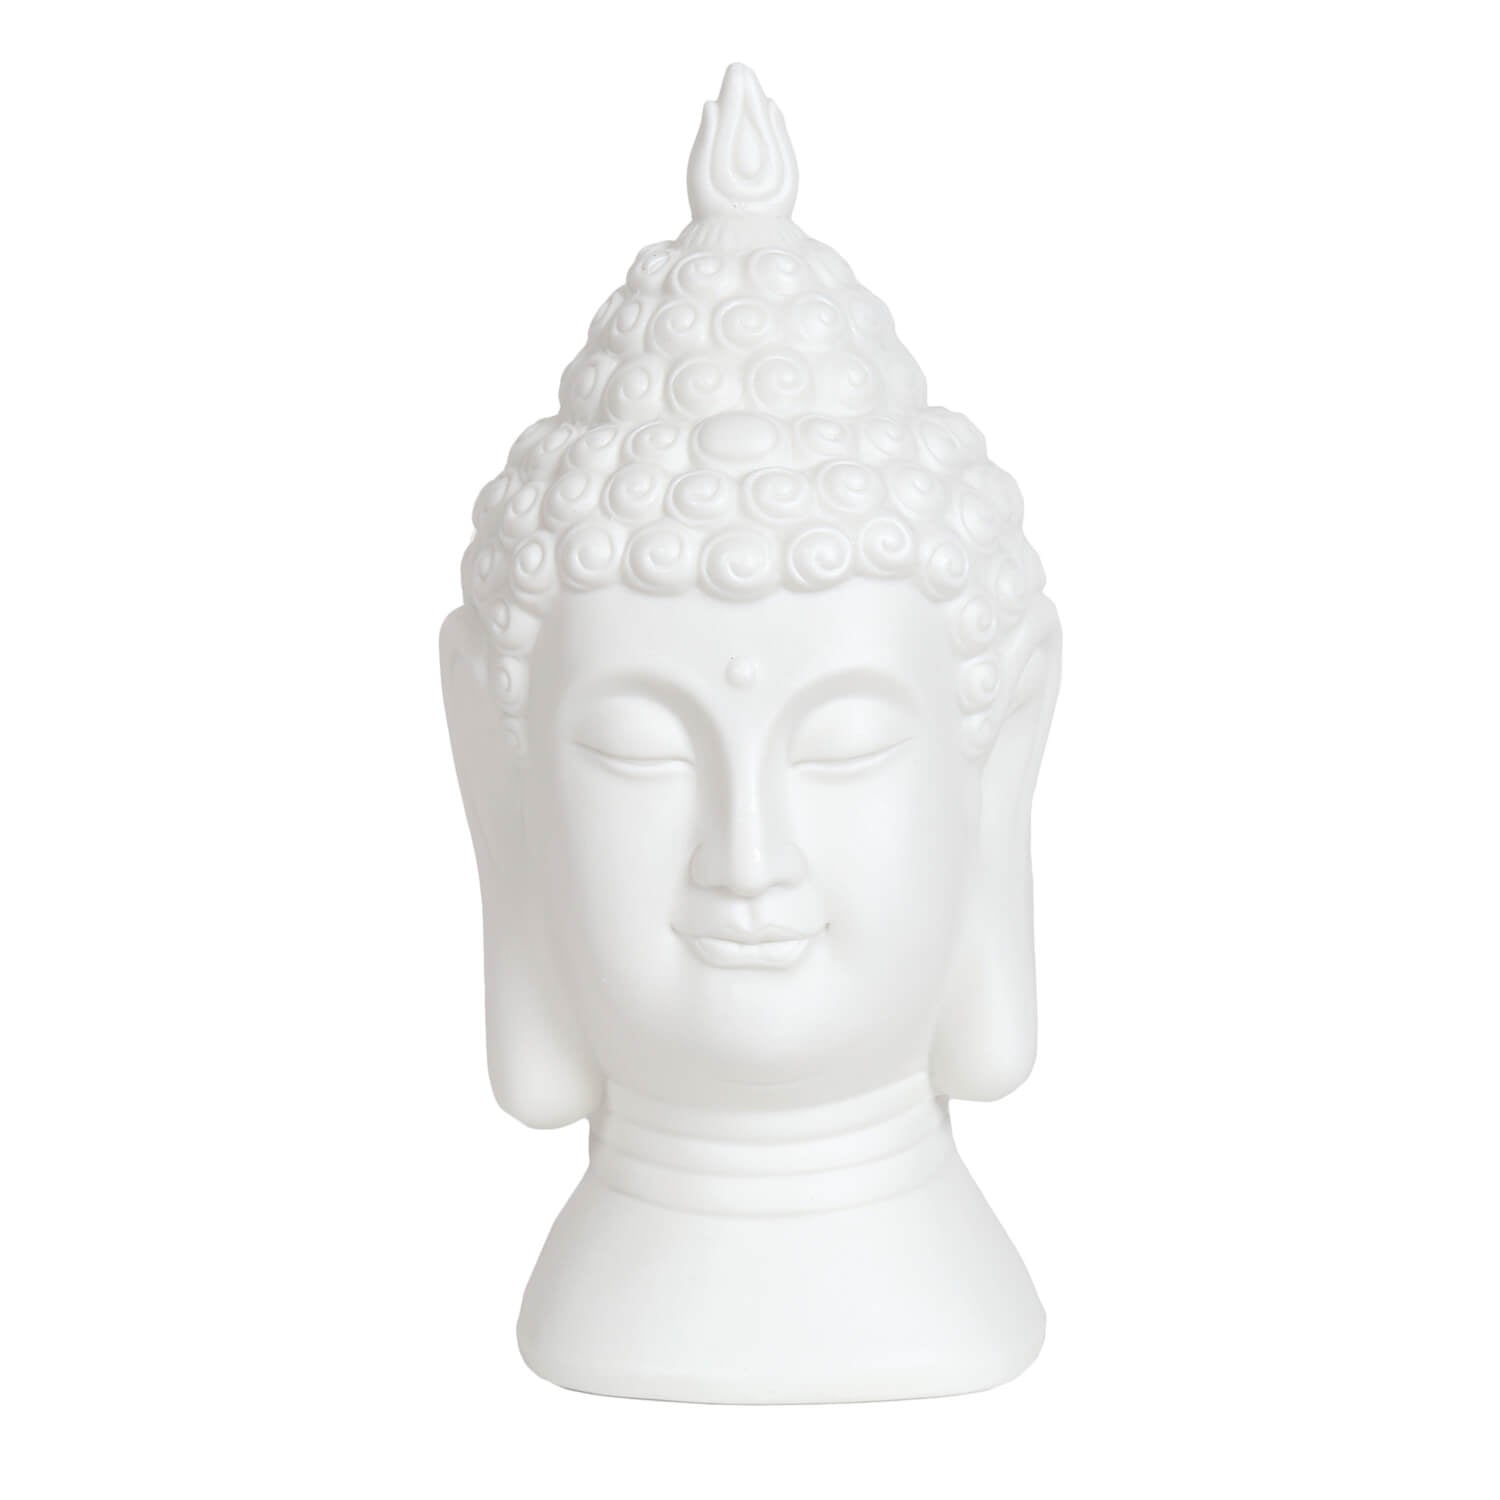 The Home Collection Buddah Head - 18.5cm 1 Shaws Department Stores